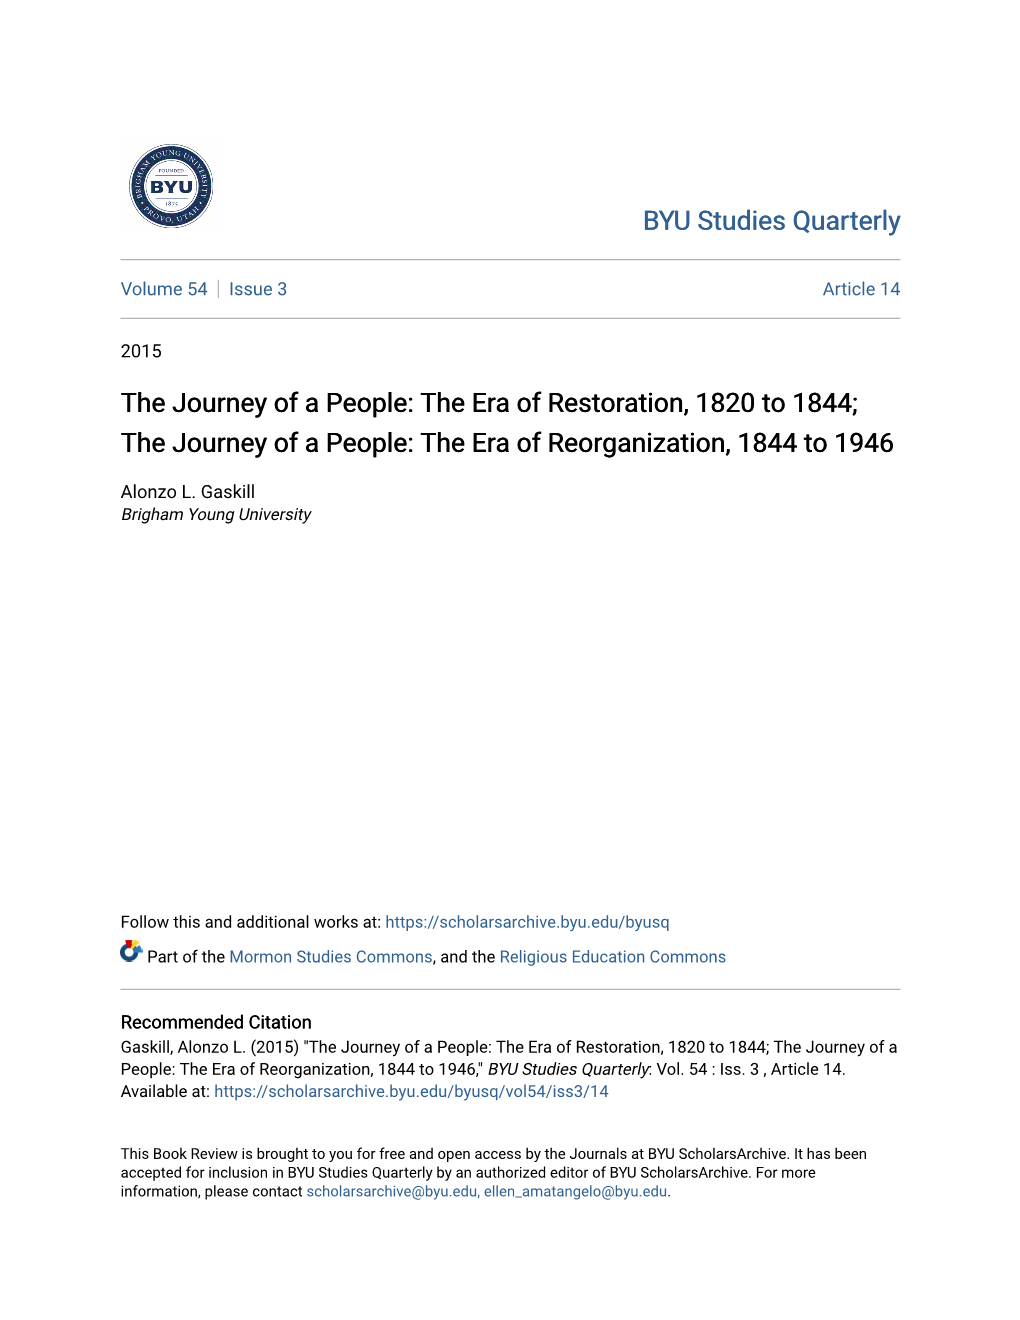 The Era of Restoration, 1820 to 1844; the Journey of a People: the Era of Reorganization, 1844 to 1946